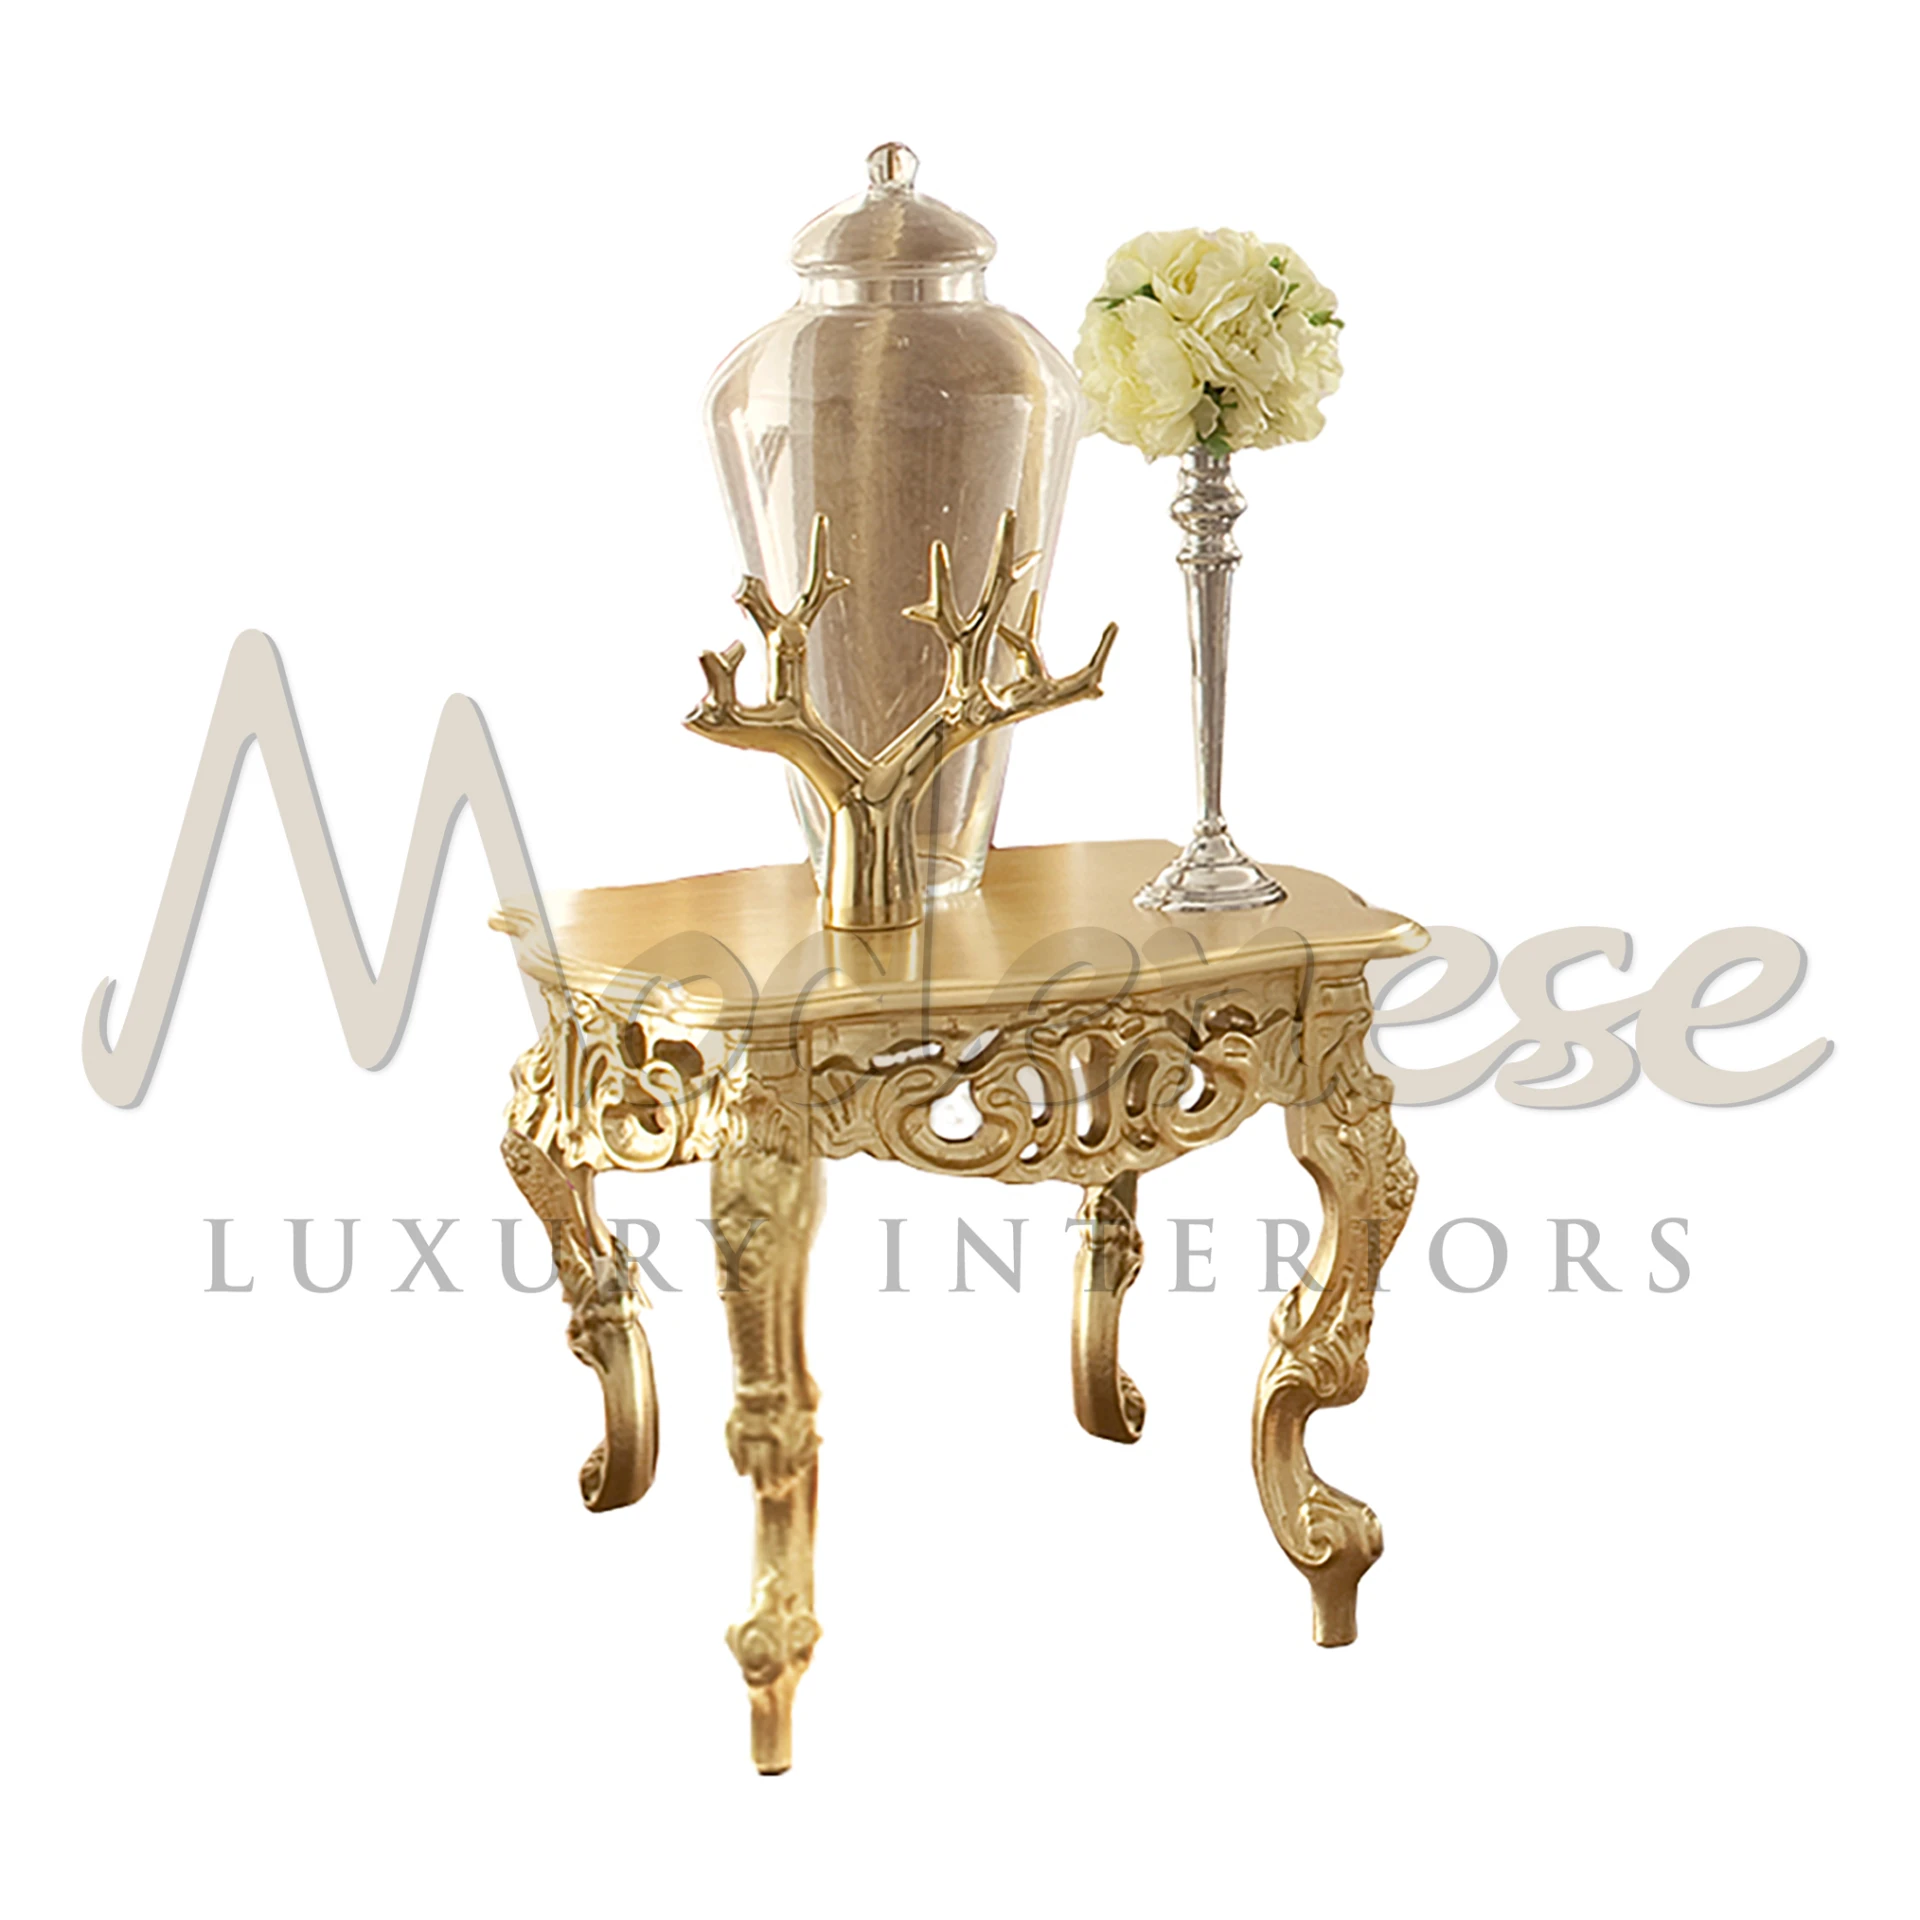 Elegant Square Side Table: Gold Leaf Accent for Luxurious Living